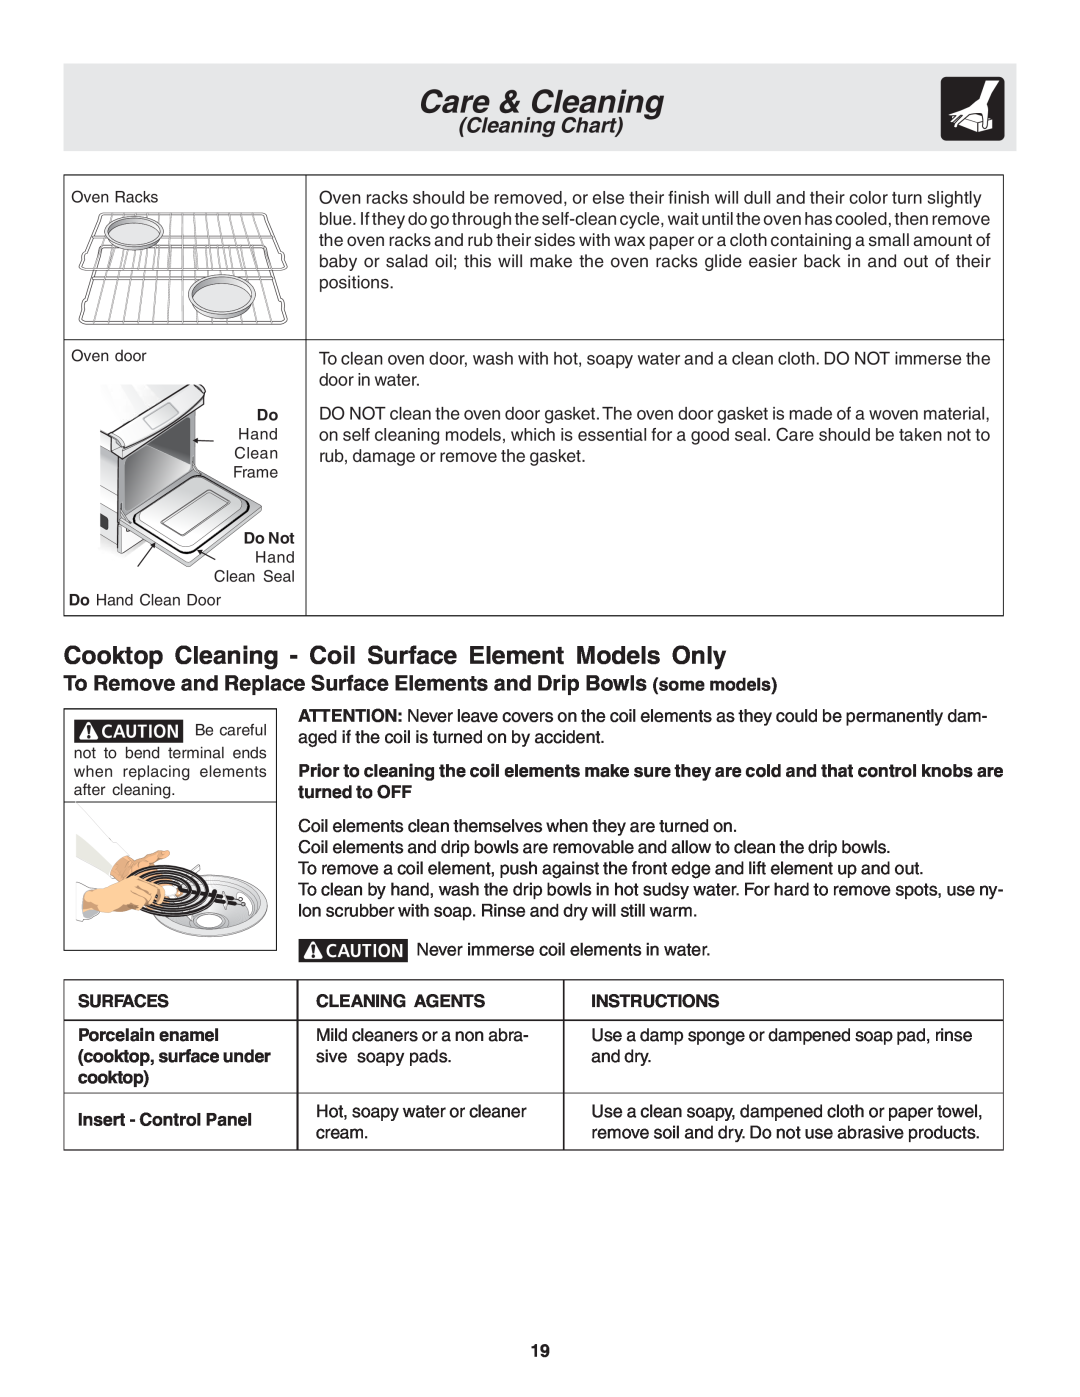 Frigidaire 318203821 Care & Cleaning, Cleaning Chart, Surfaces, Cleaning Agents, Instructions, Porcelain enamel, cooktop 